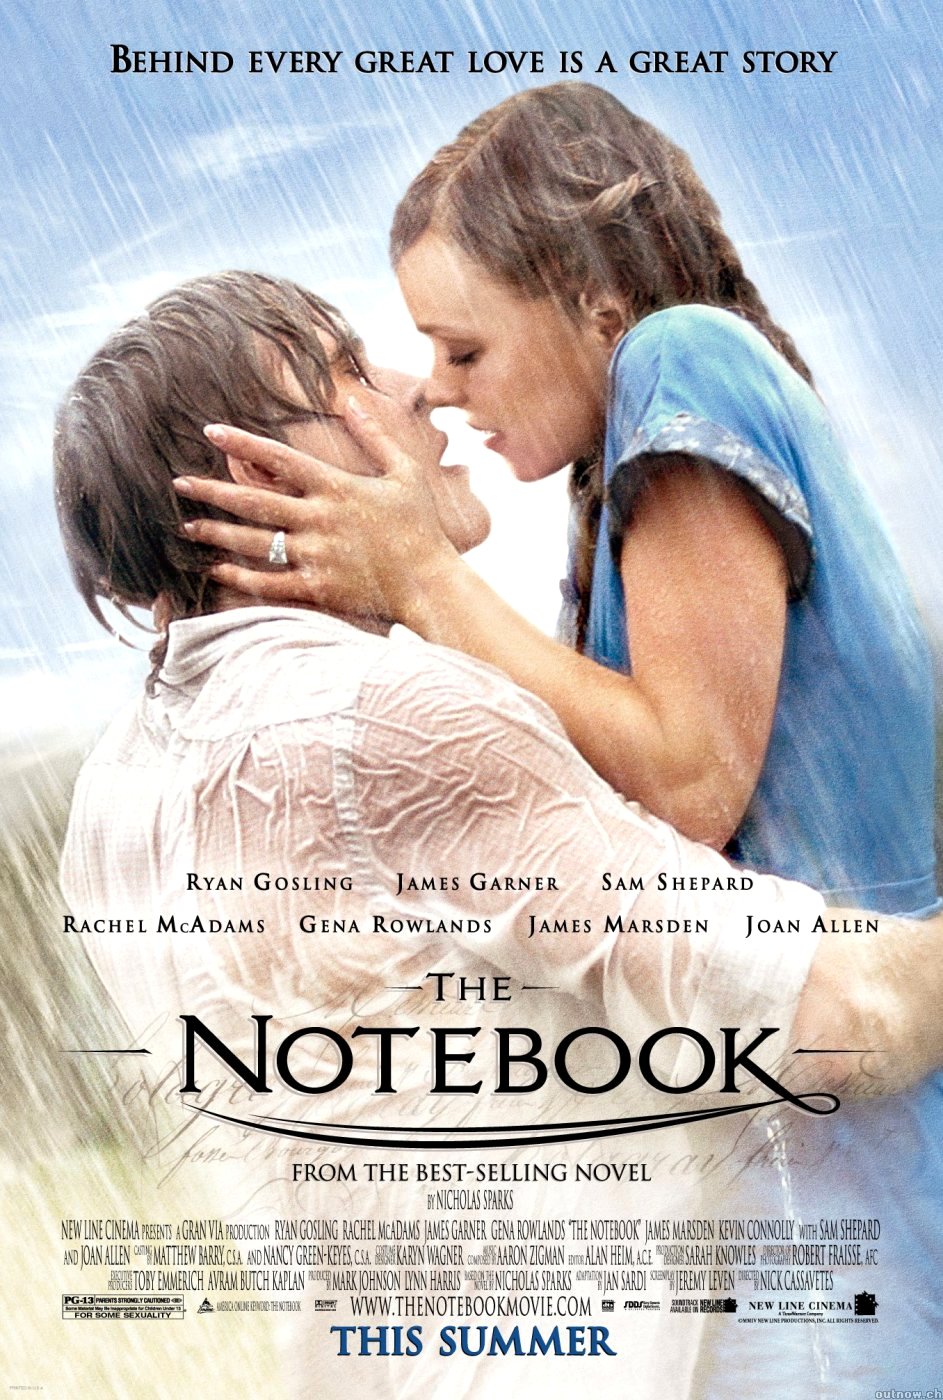 The Notebook Movie Poster Google image from http://economydecoded.com/wp-content/uploads/2014/01/The-notebook.jpg